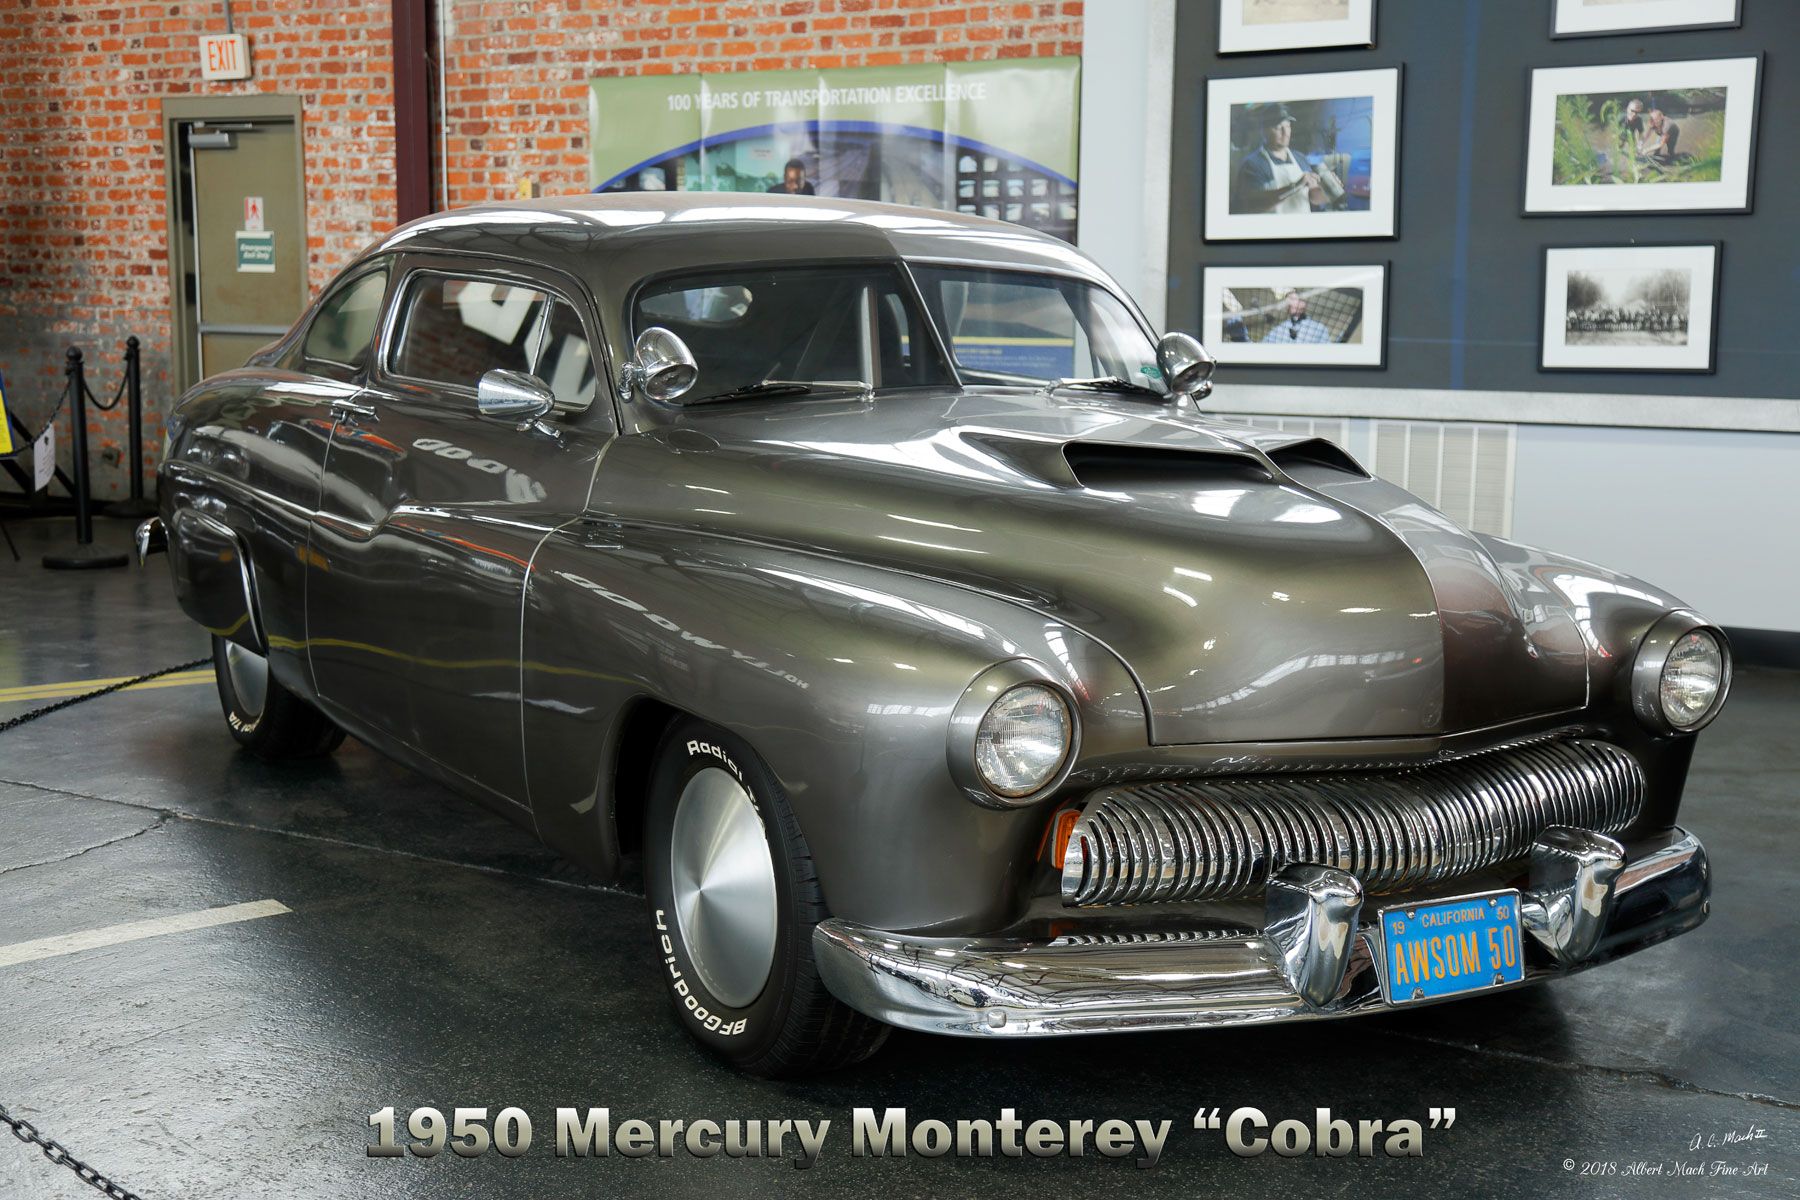 Passenger front quarter view of the 1950 Mercury Monterey used in the Cobra movie, which starred Sylvester Stallone.